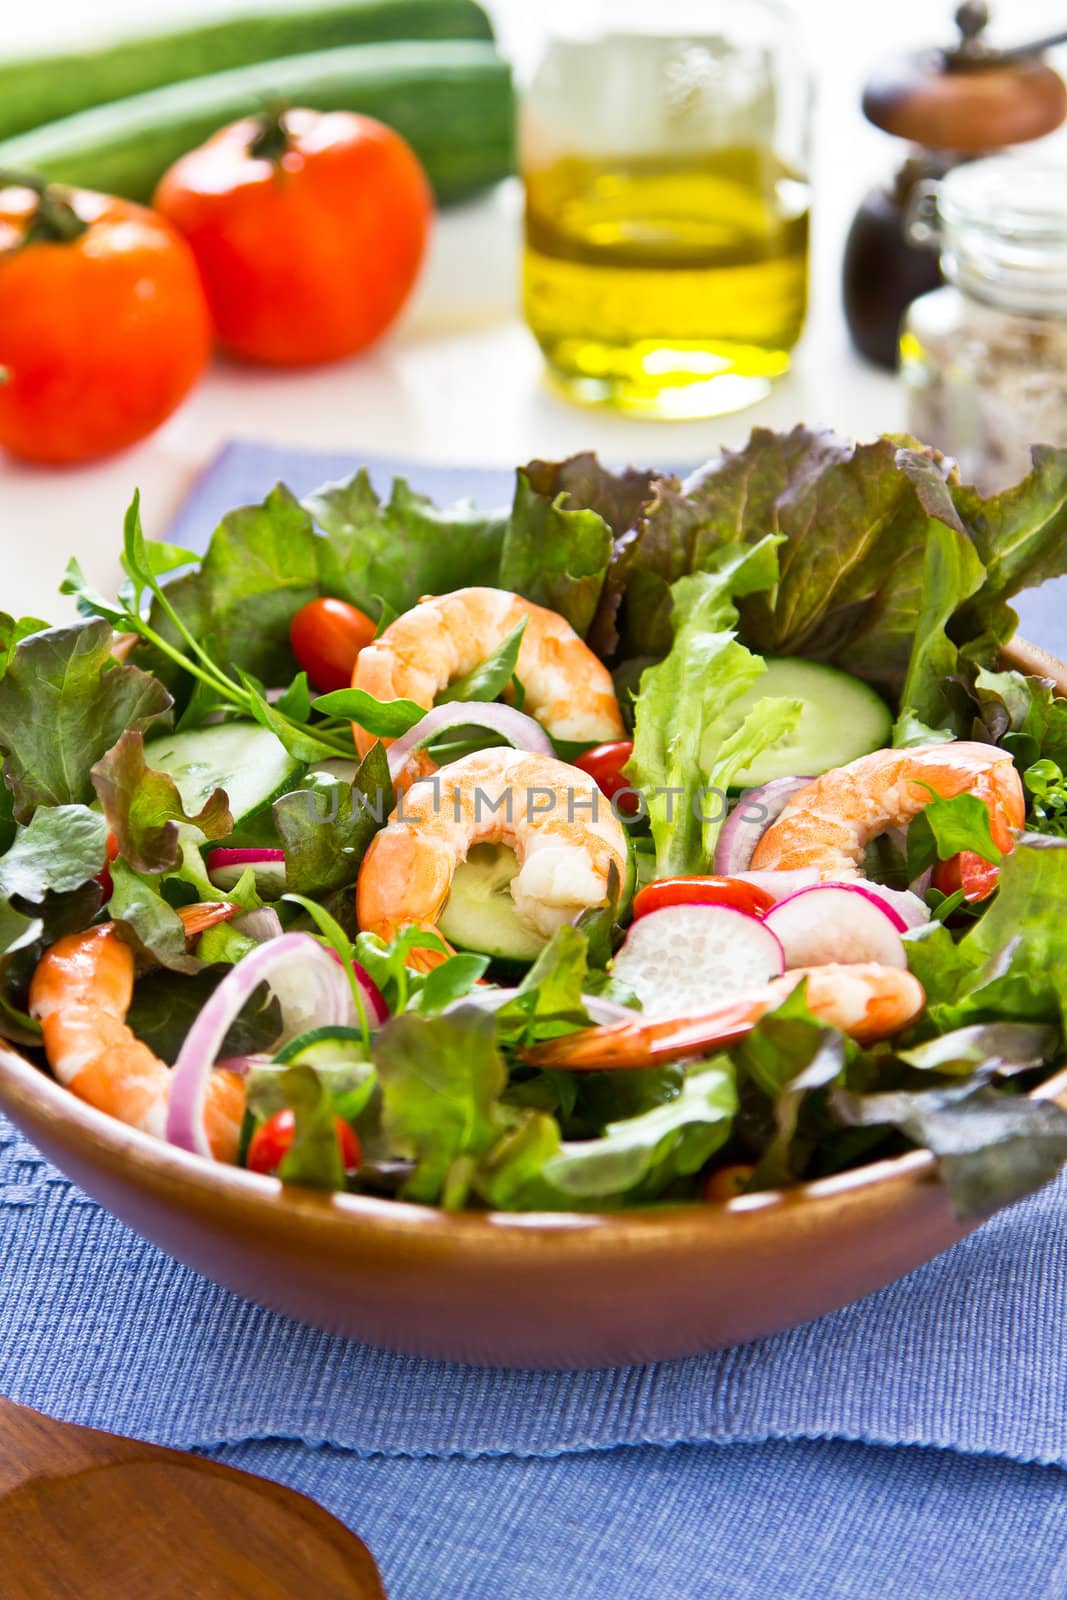 Prawn with lettuce ,tomato and radish salad in wood bowl